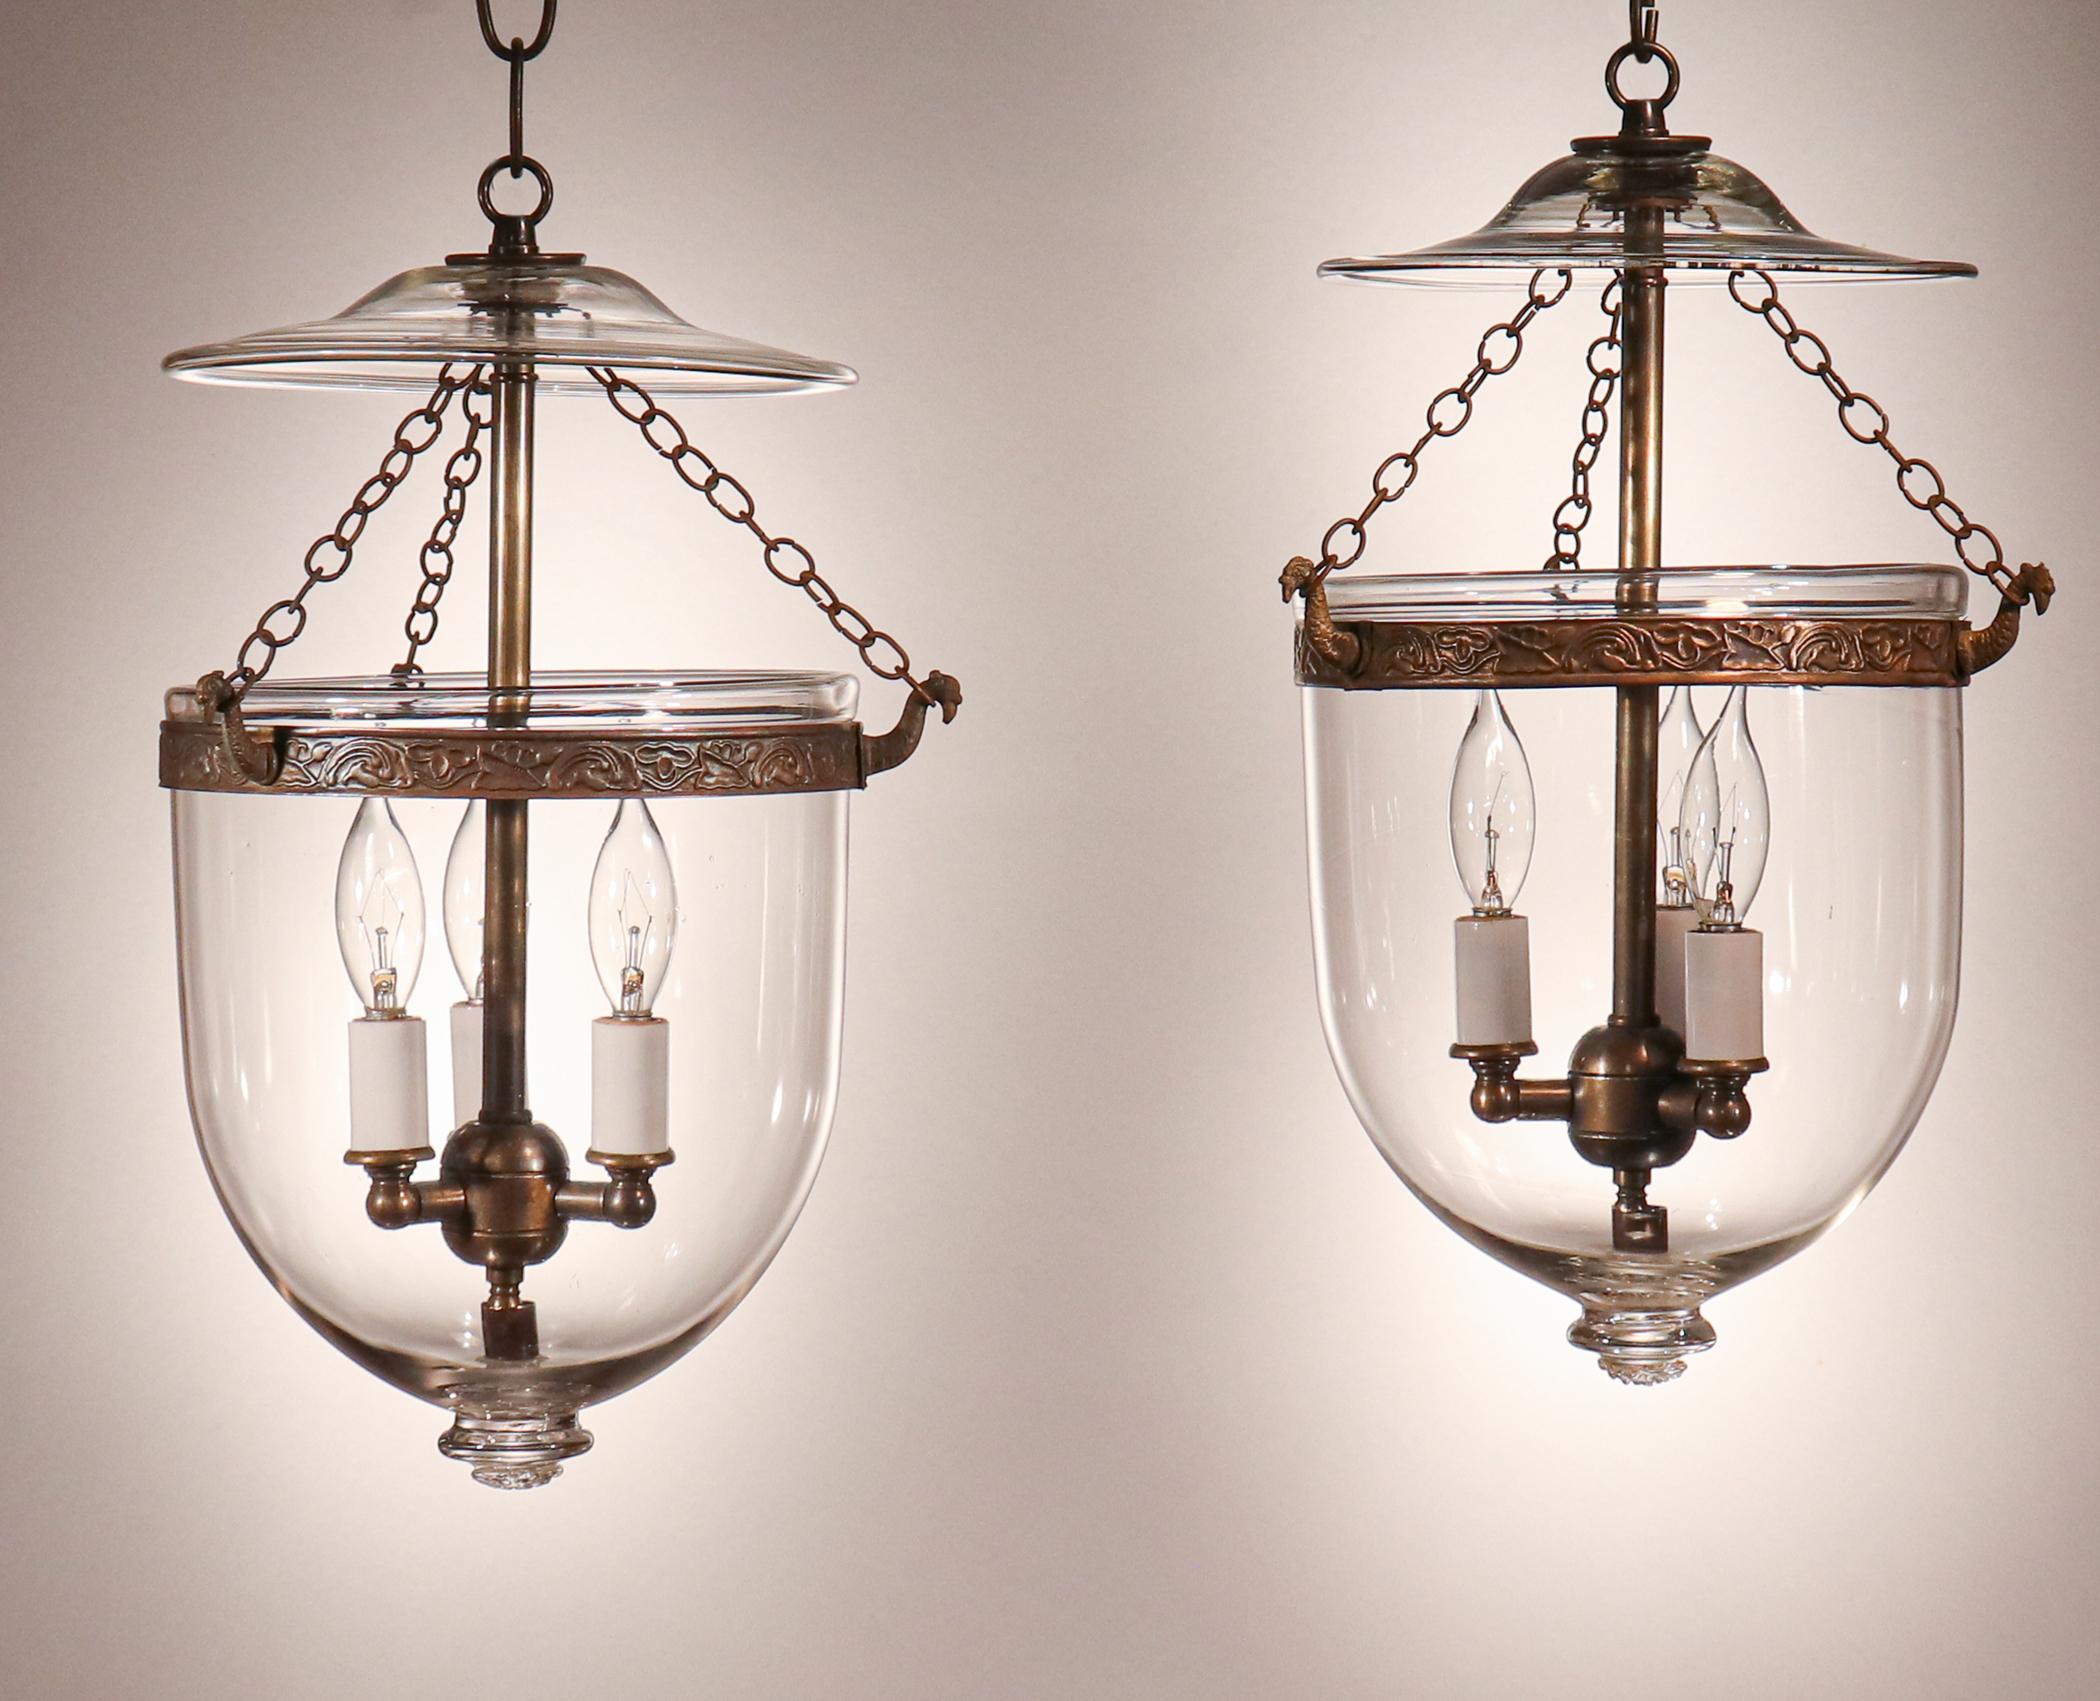 Petite and sweet, these antique English hand blown glass bell jar lanterns are a rare find. Perfect for lower ceiling heights and smaller spaces, these circa 1890 lanterns feature original smoke bells/lids and chains. The brass bands, which have an